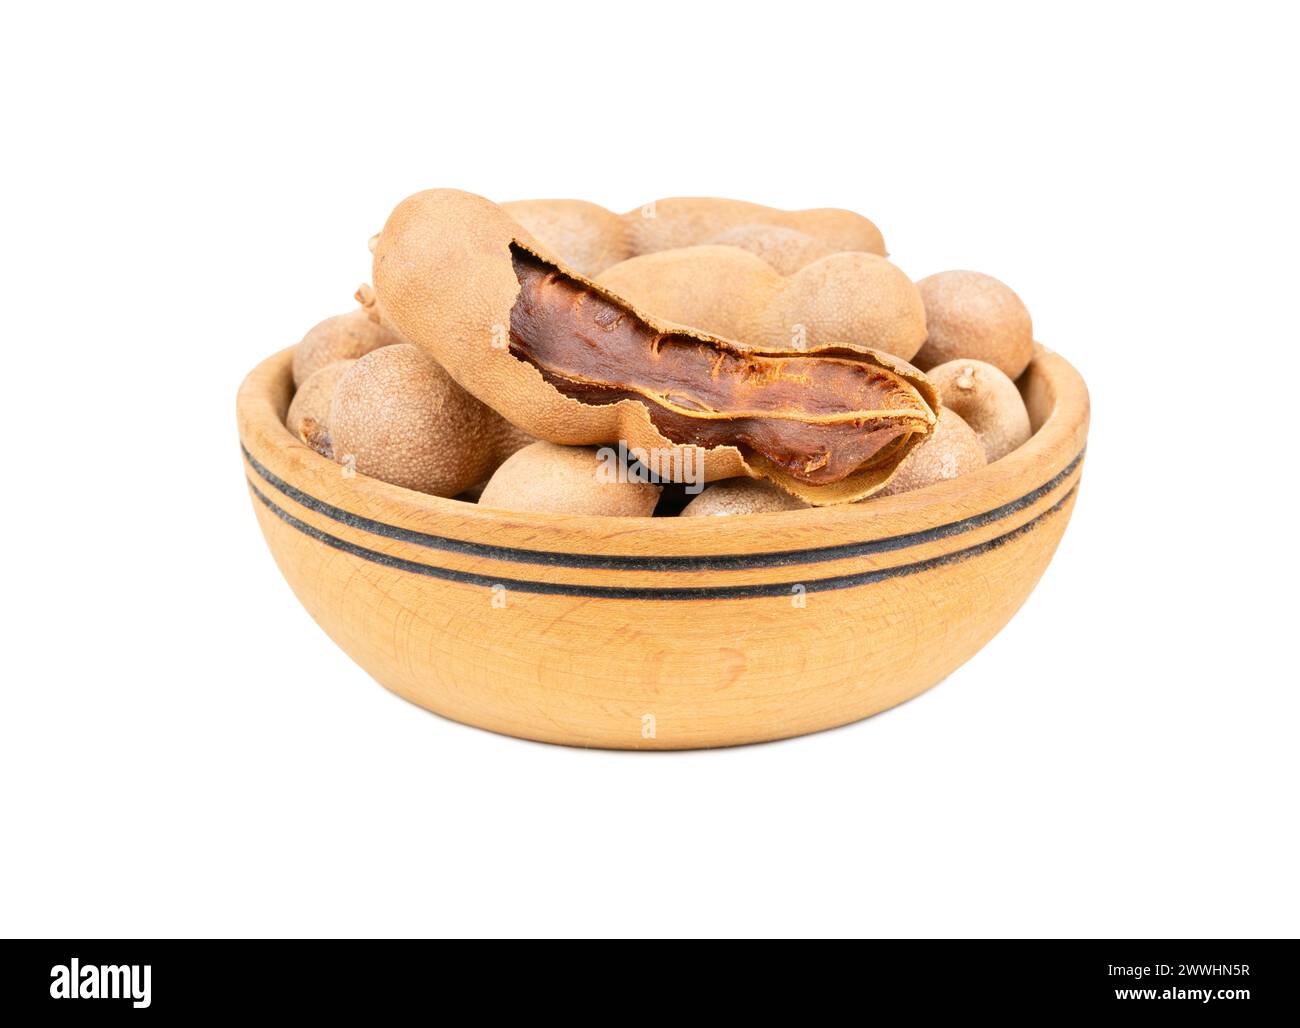 Tamarind fruit in wooden bowl isolated on white background Stock Photo